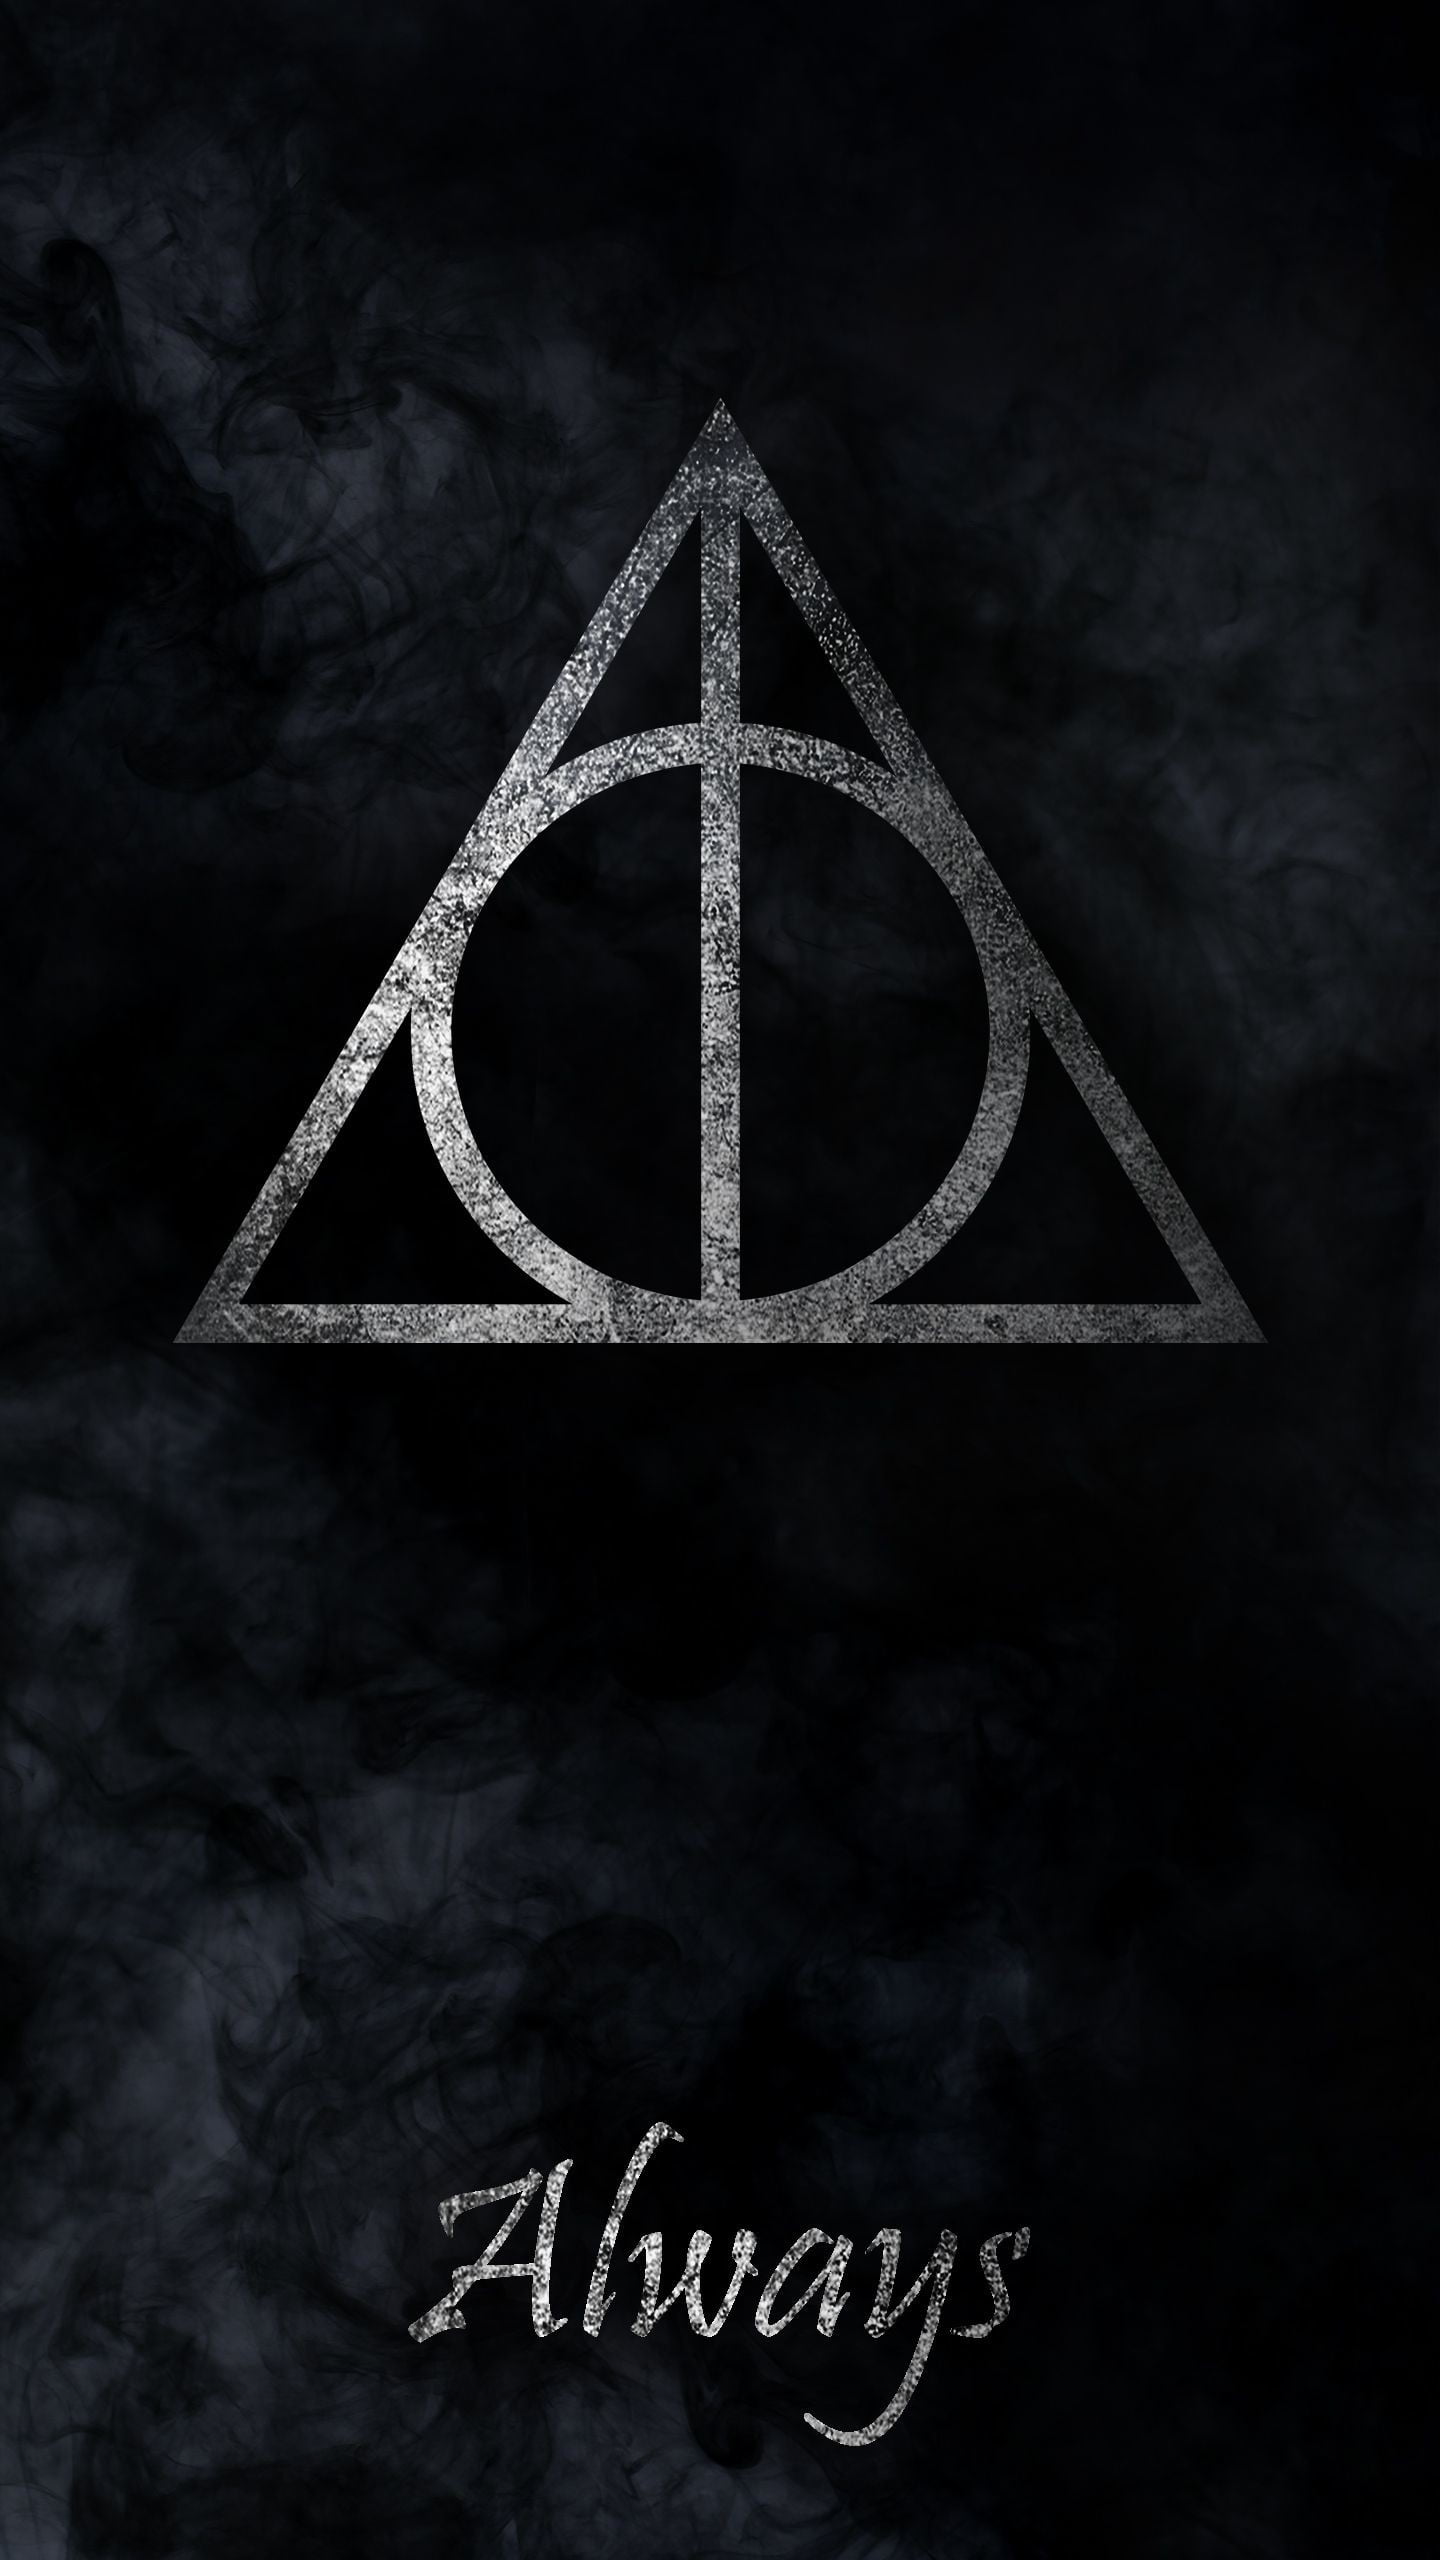 Harry Potter Iphone Wallpapers